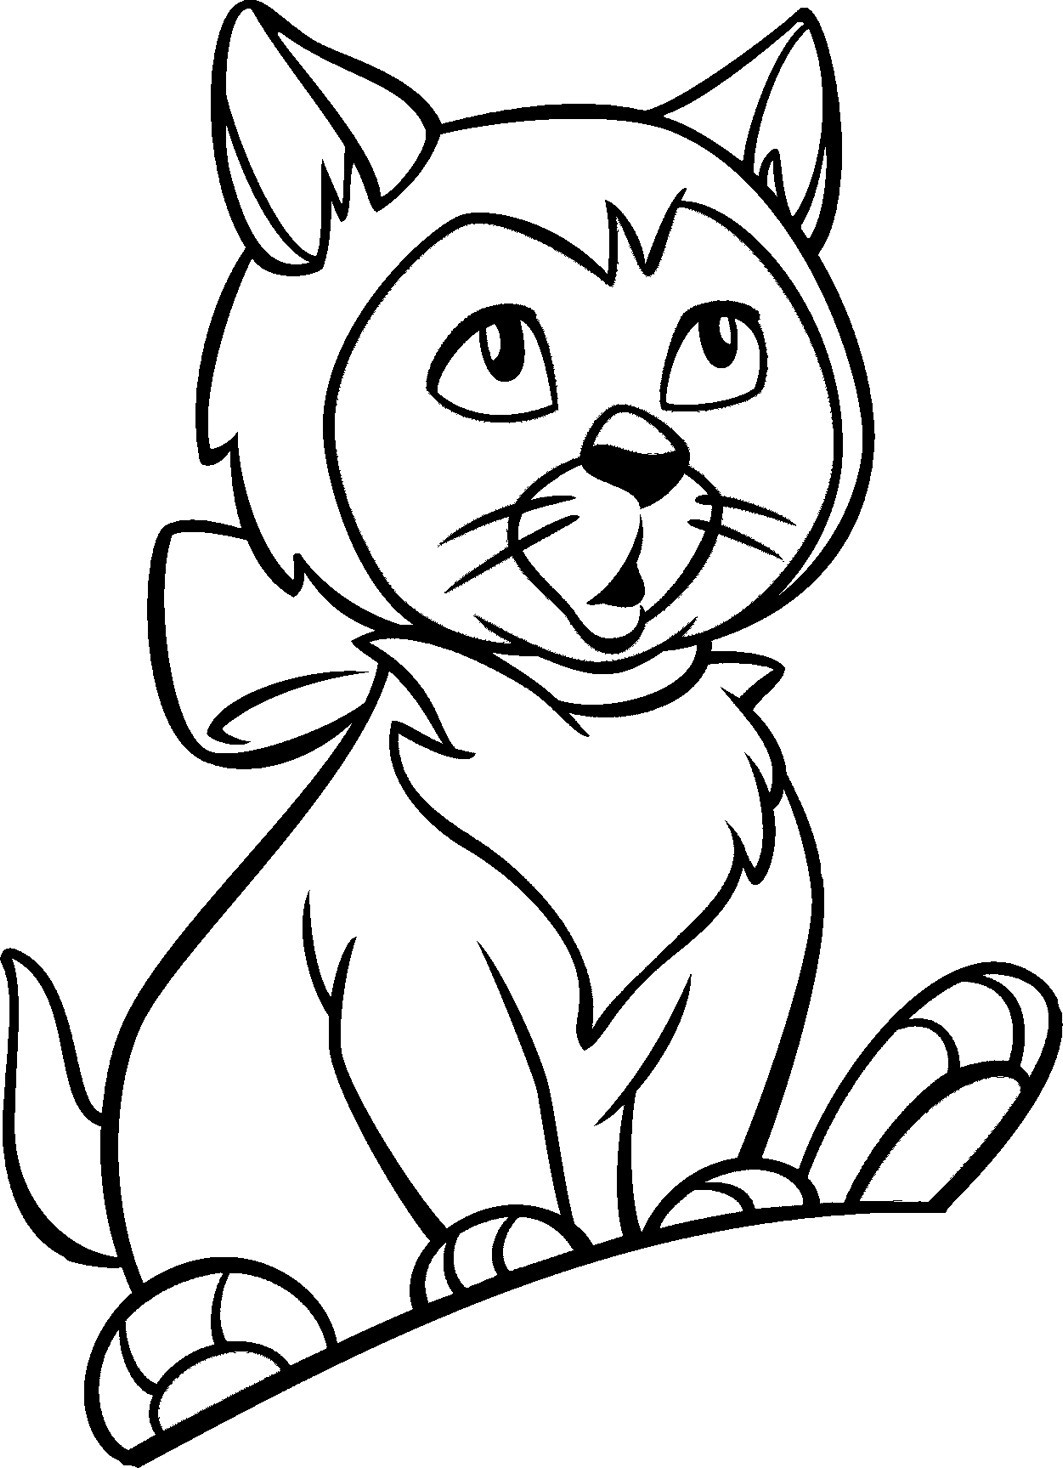 Printable Cat Coloring Pages For Kids
 Coloring Pages for Kids Cat Coloring Pages for Kids